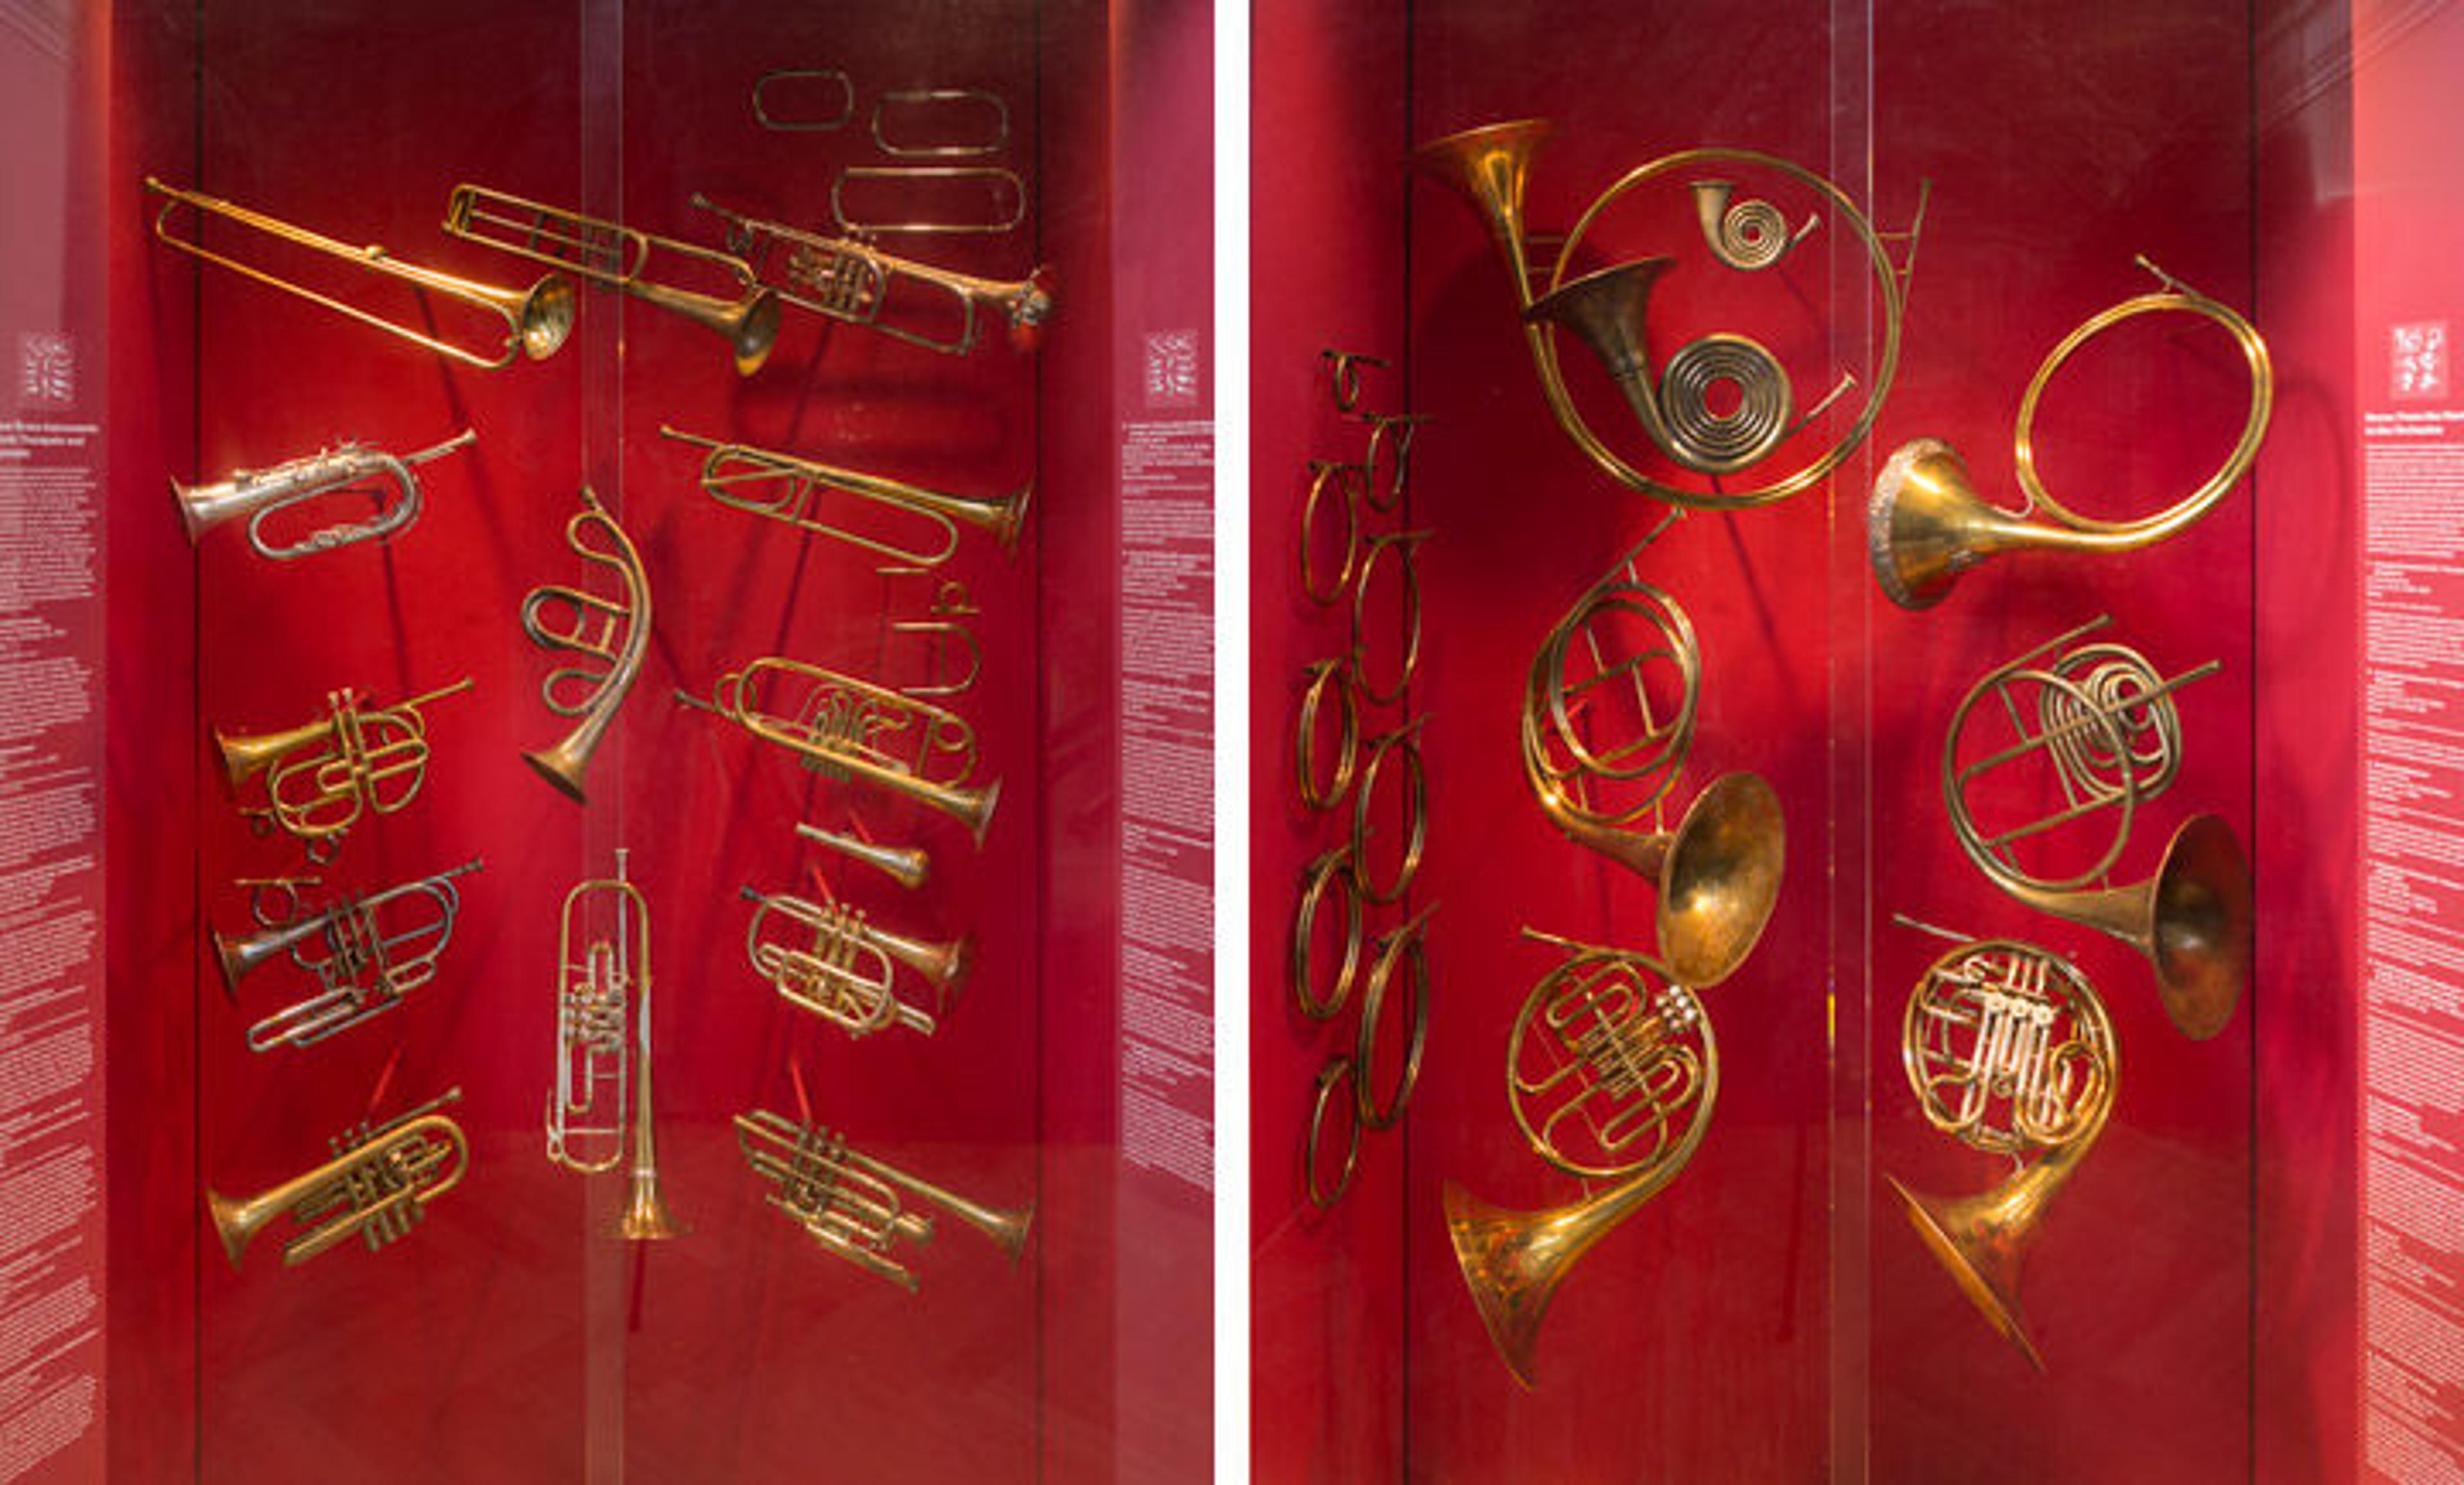 Views of two wall cases showing various trumpets and French horns